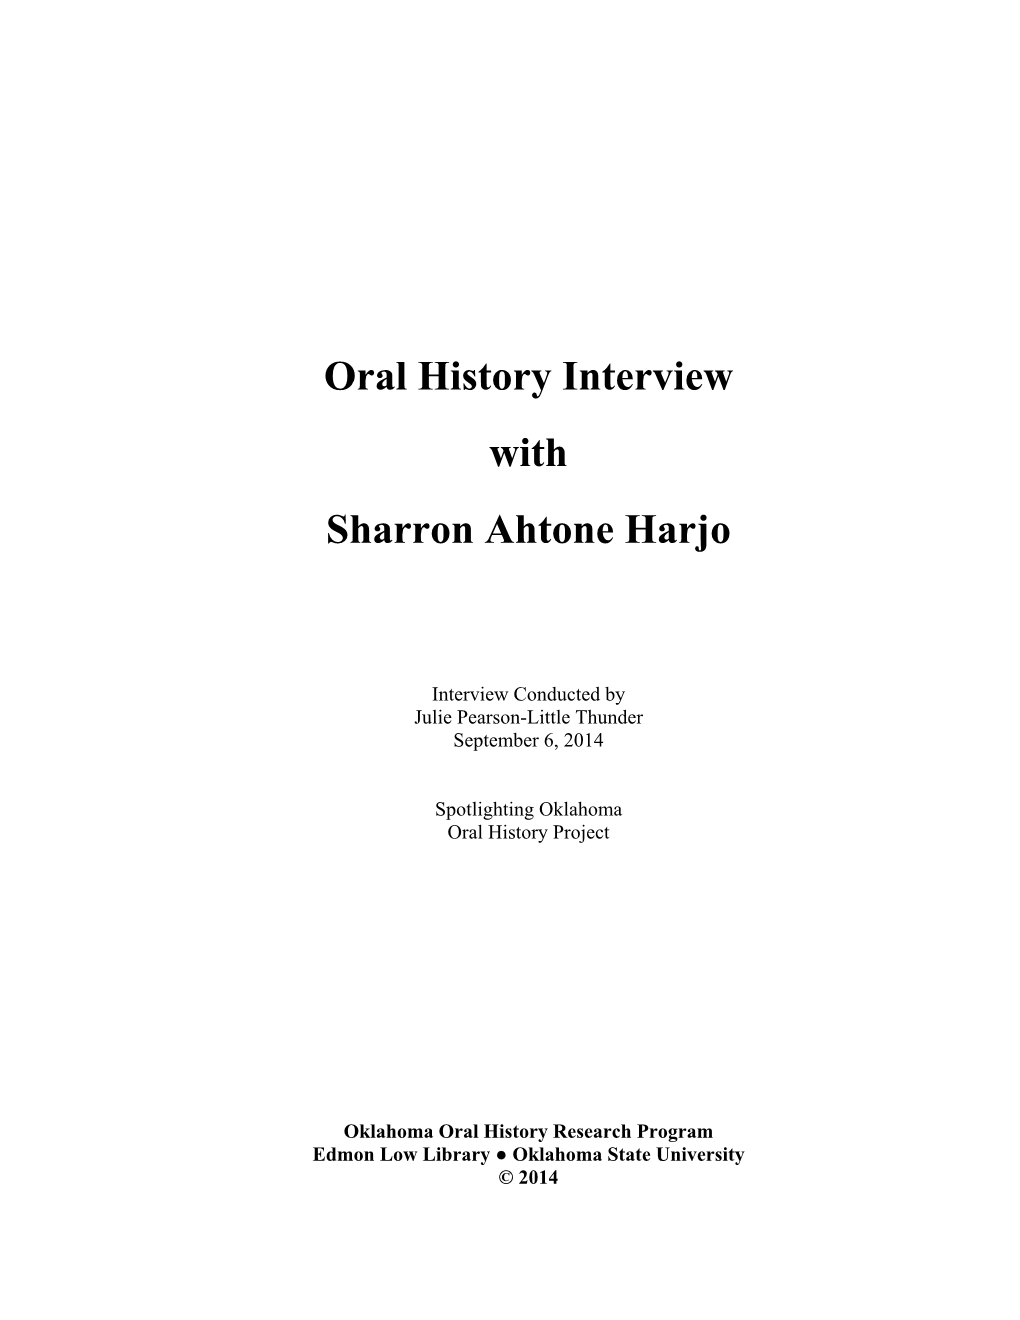 Oral History Interview with Sharron Ahtone Harjo